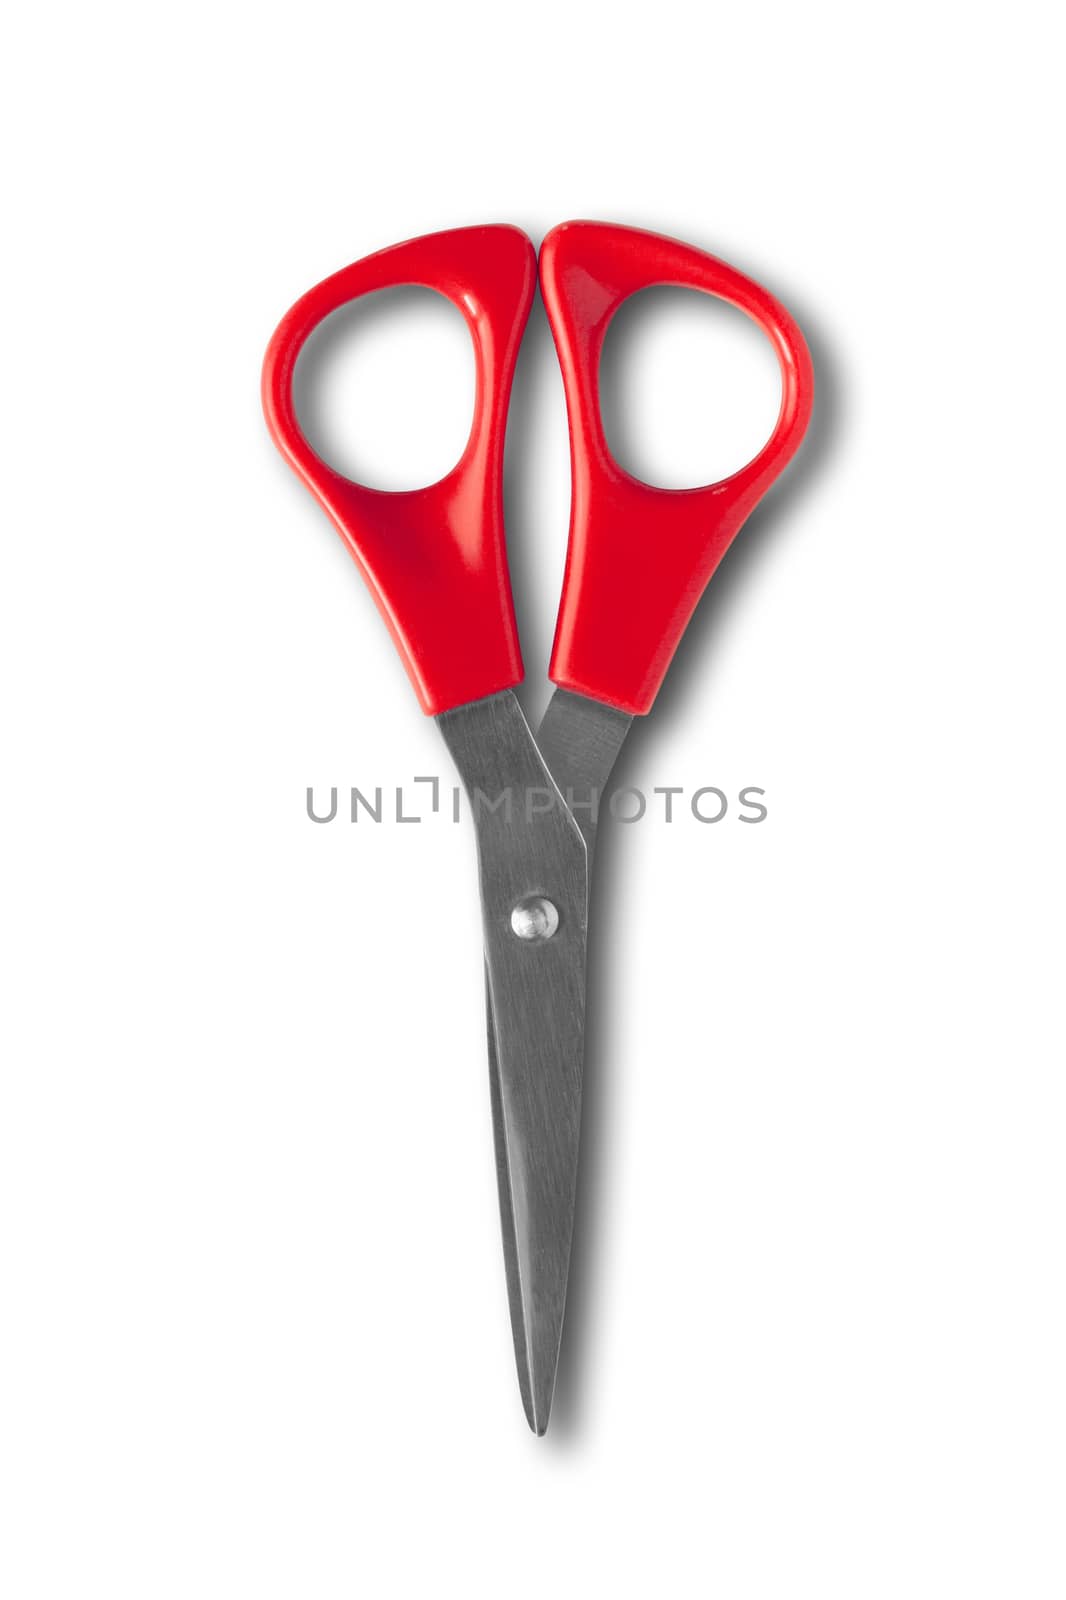 Pair of scissors isolated on white background by daboost